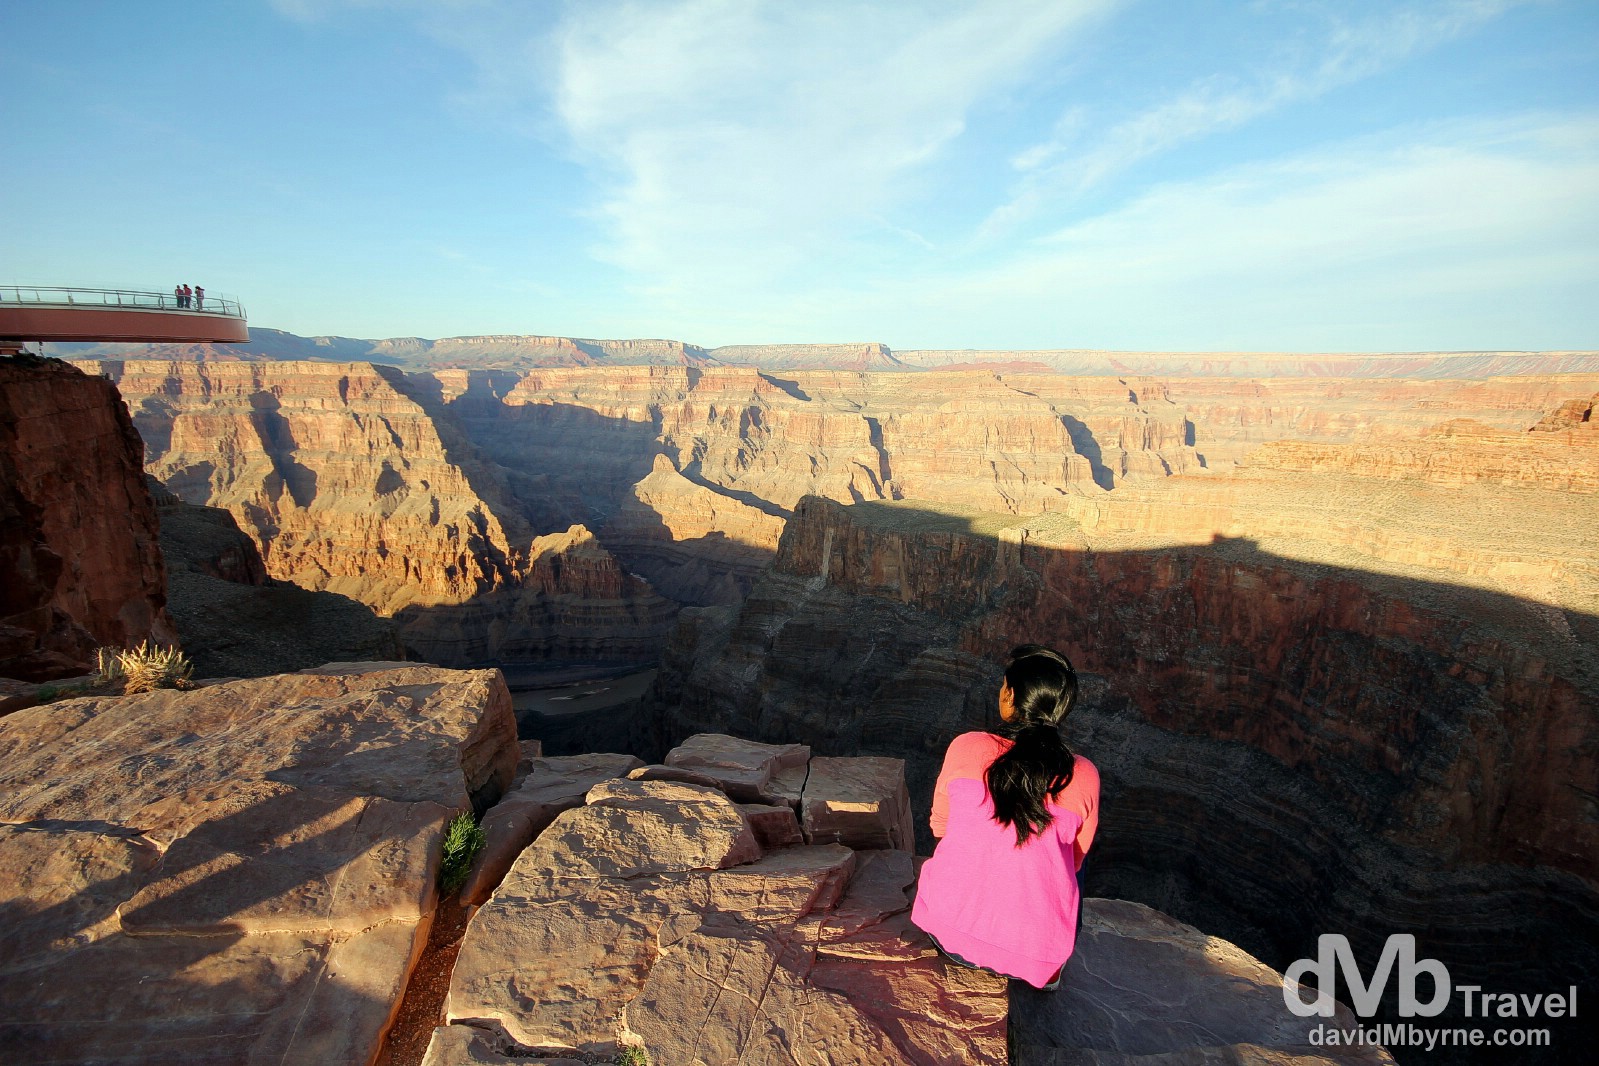 Sitting by the edge of The Grand Canyon at Eagle Point, The Grand Canyon West, Arizona, USA. April 6th 2013. 